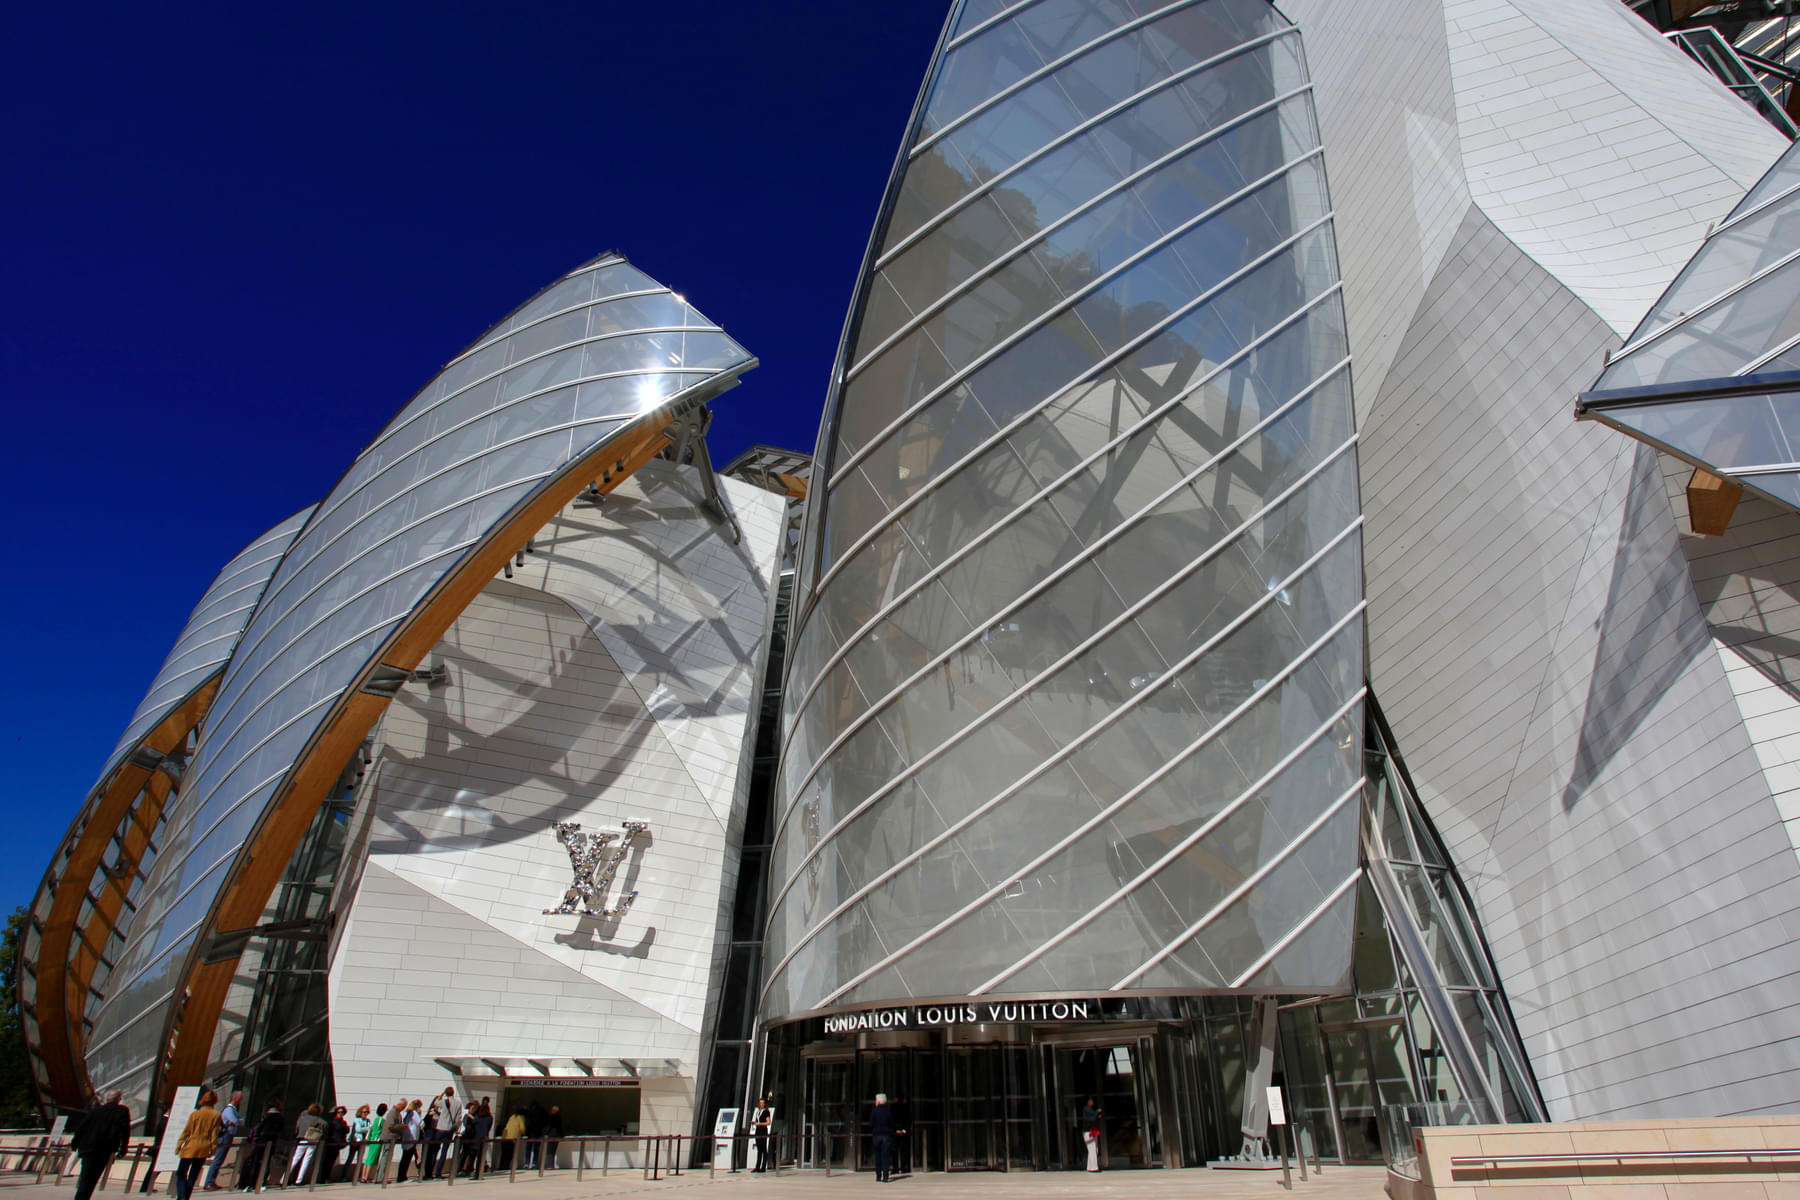 Enter the Louis Vuitton Foundation building which is itself a work of art